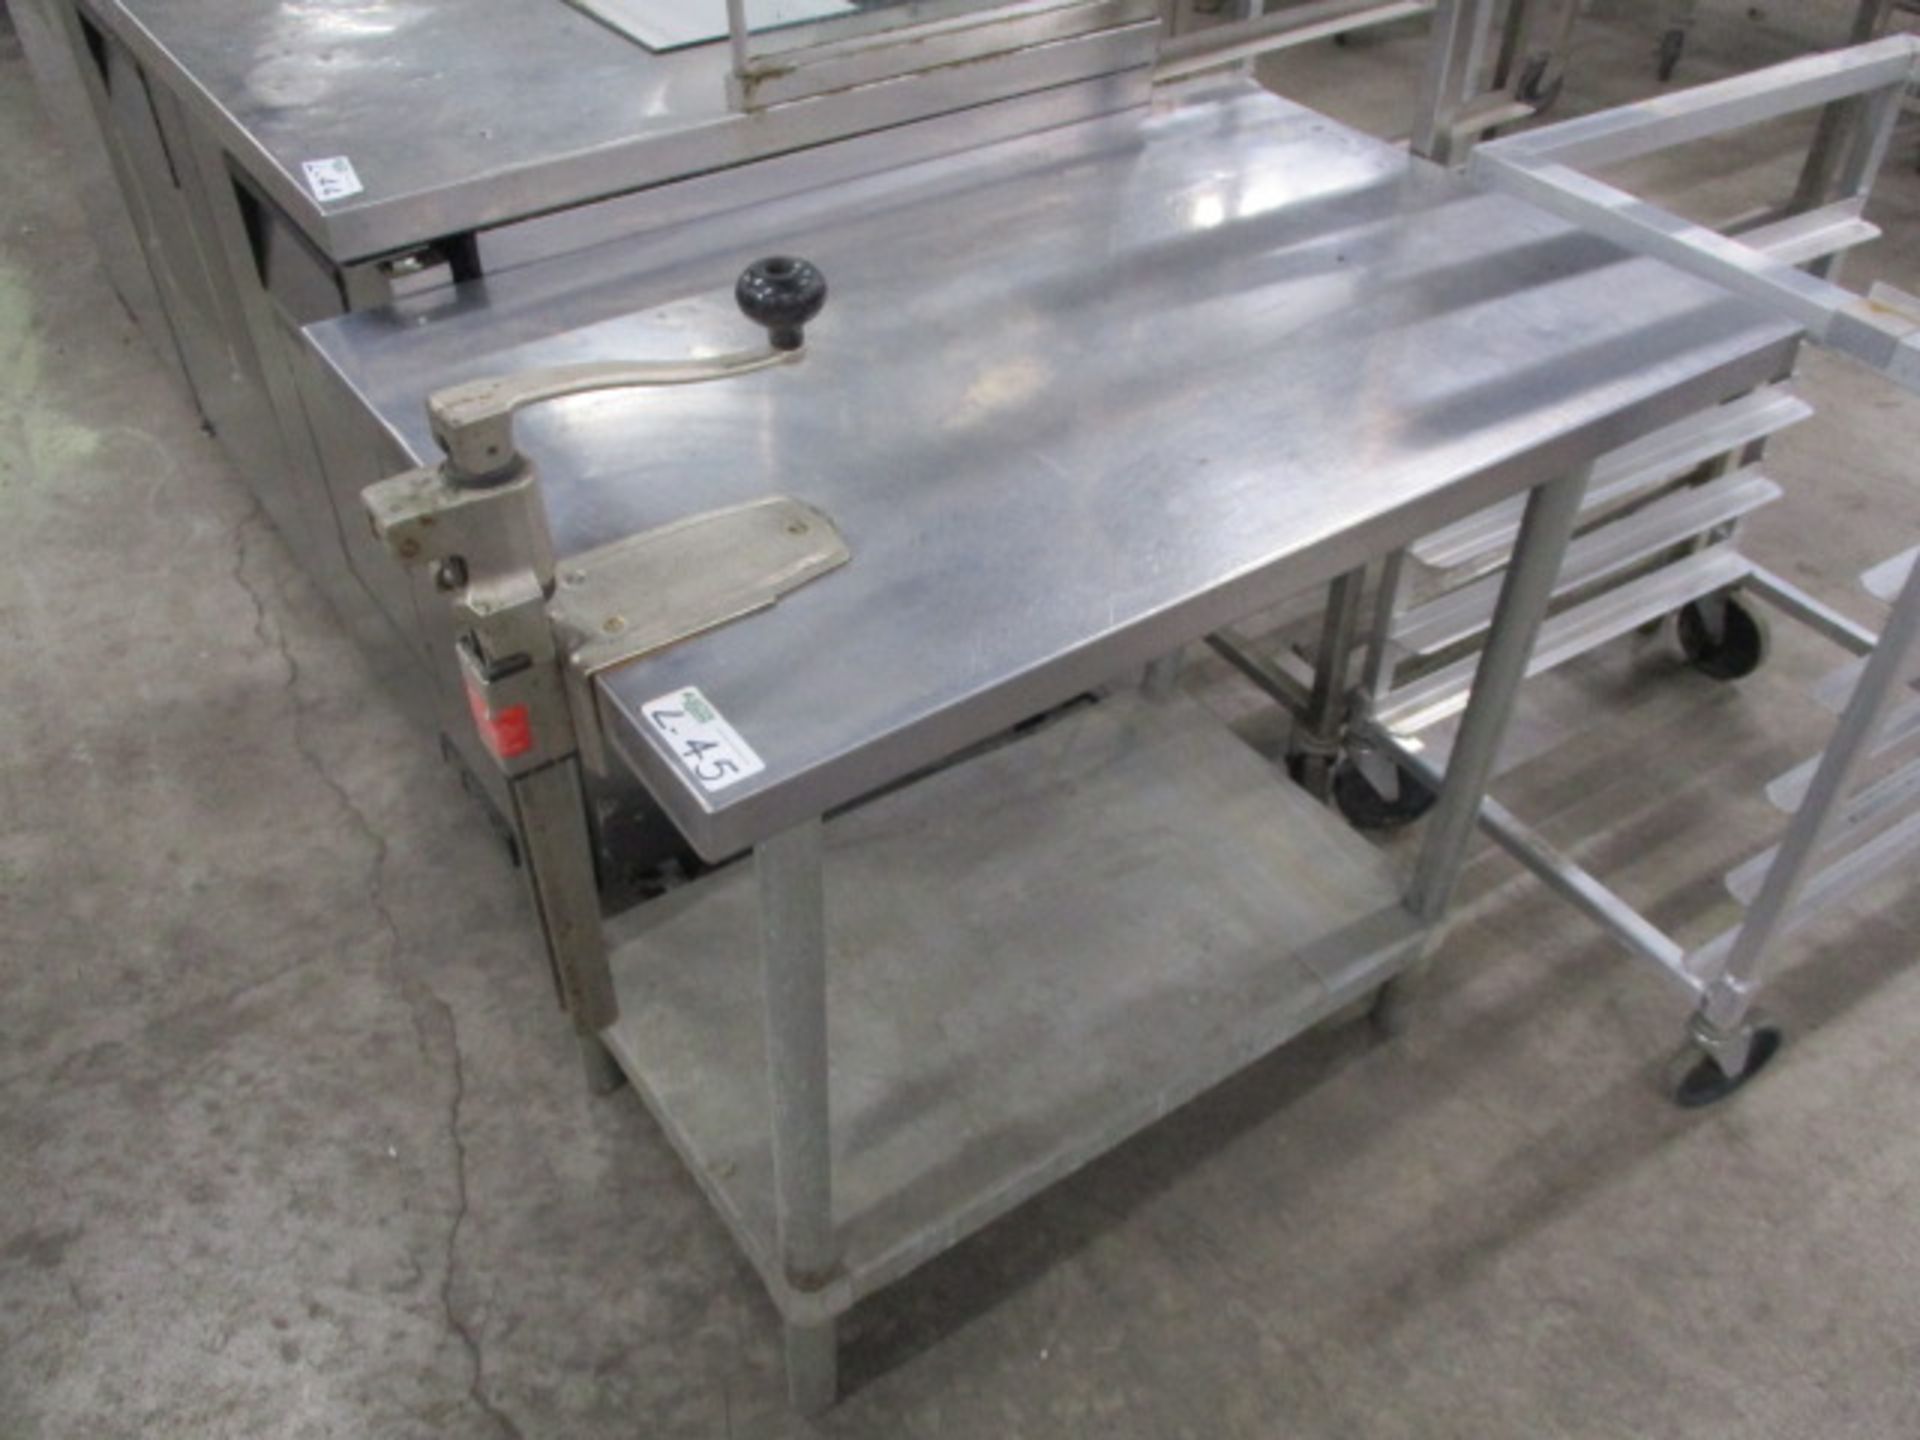 36" X 24" S/S Table with Can Opener